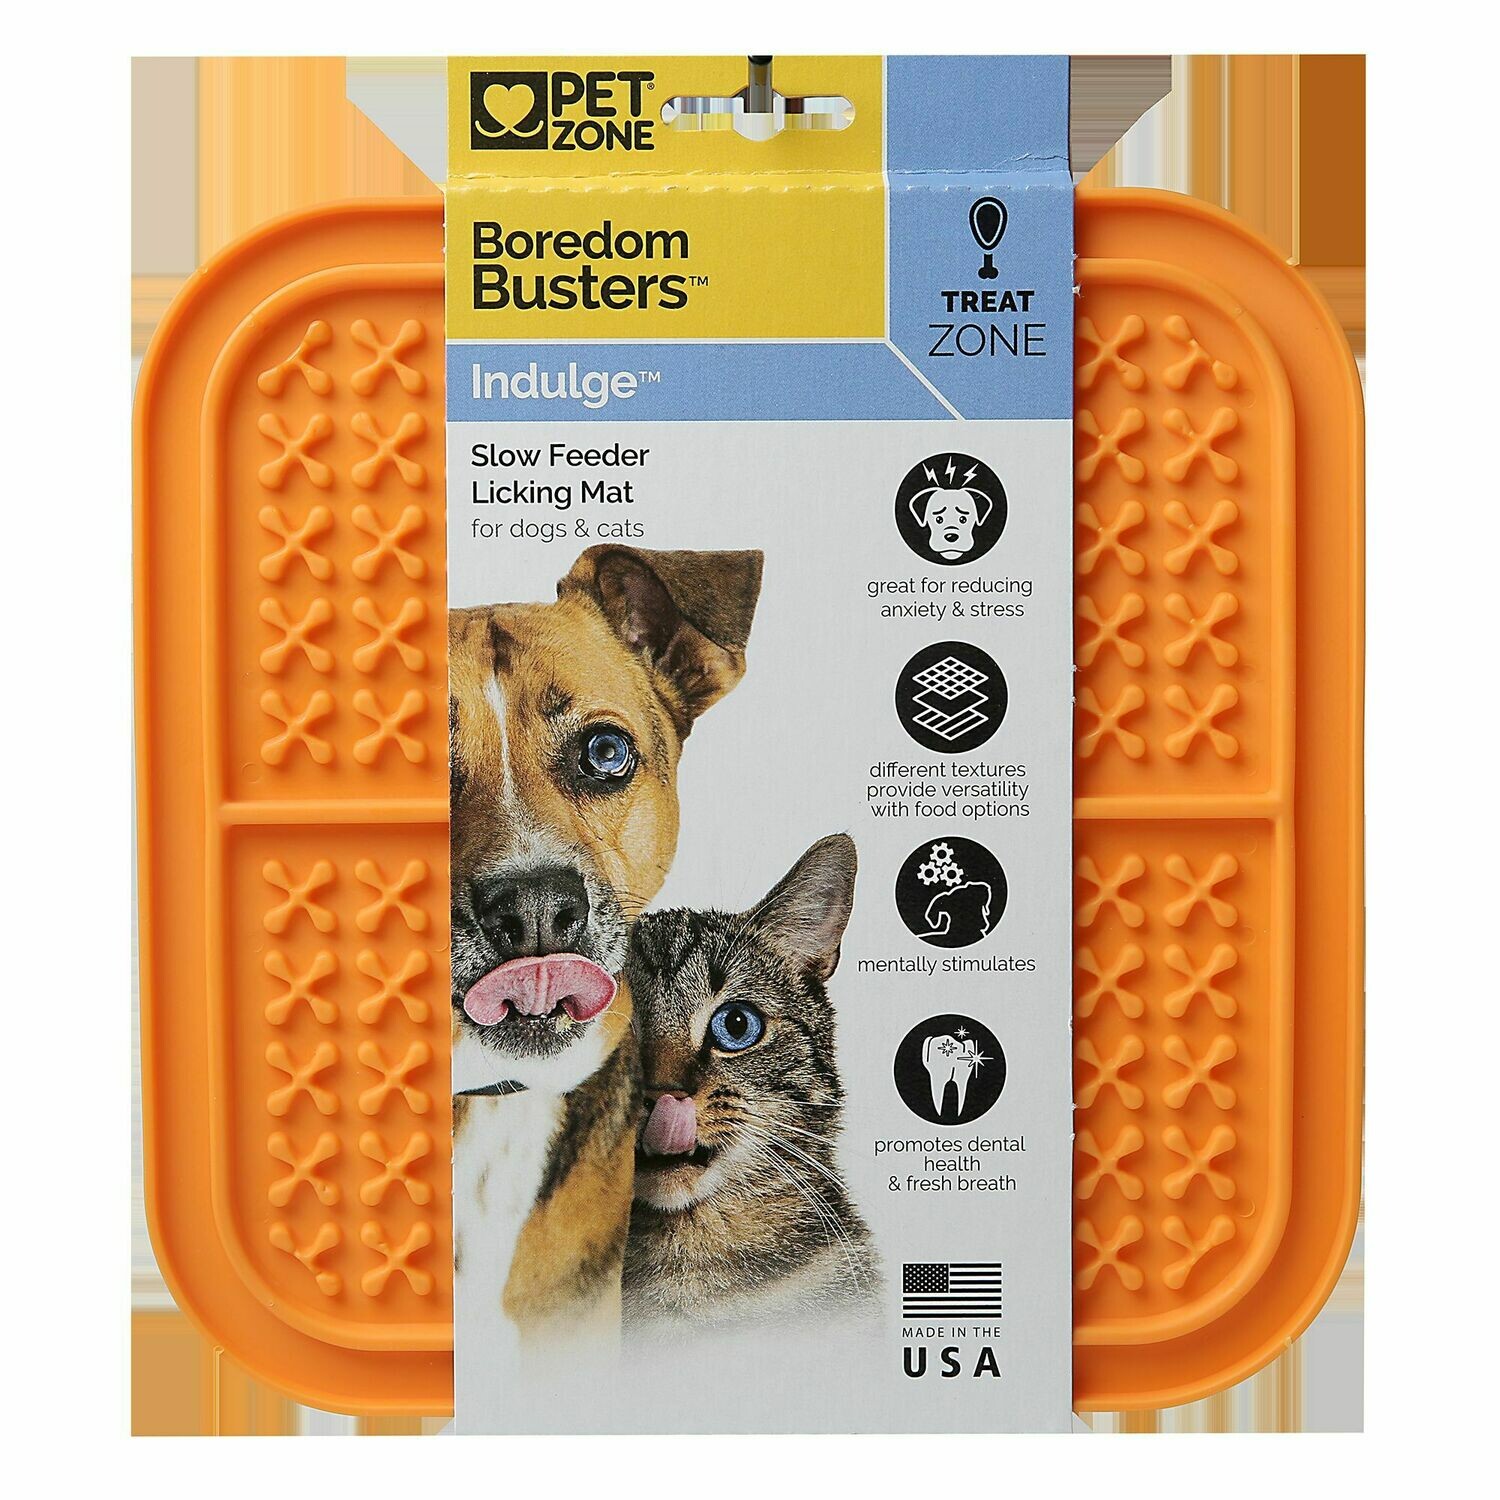 Boredom & Anxiety Reducer; for Food Yogurt 2-Pack Classic Dog Buddy & Soother Fun Alternative to a Slow Feed Dog Bowl Treats Lickimat Slow Feeder for Dogs or Peanut Butter Green & Orange. 